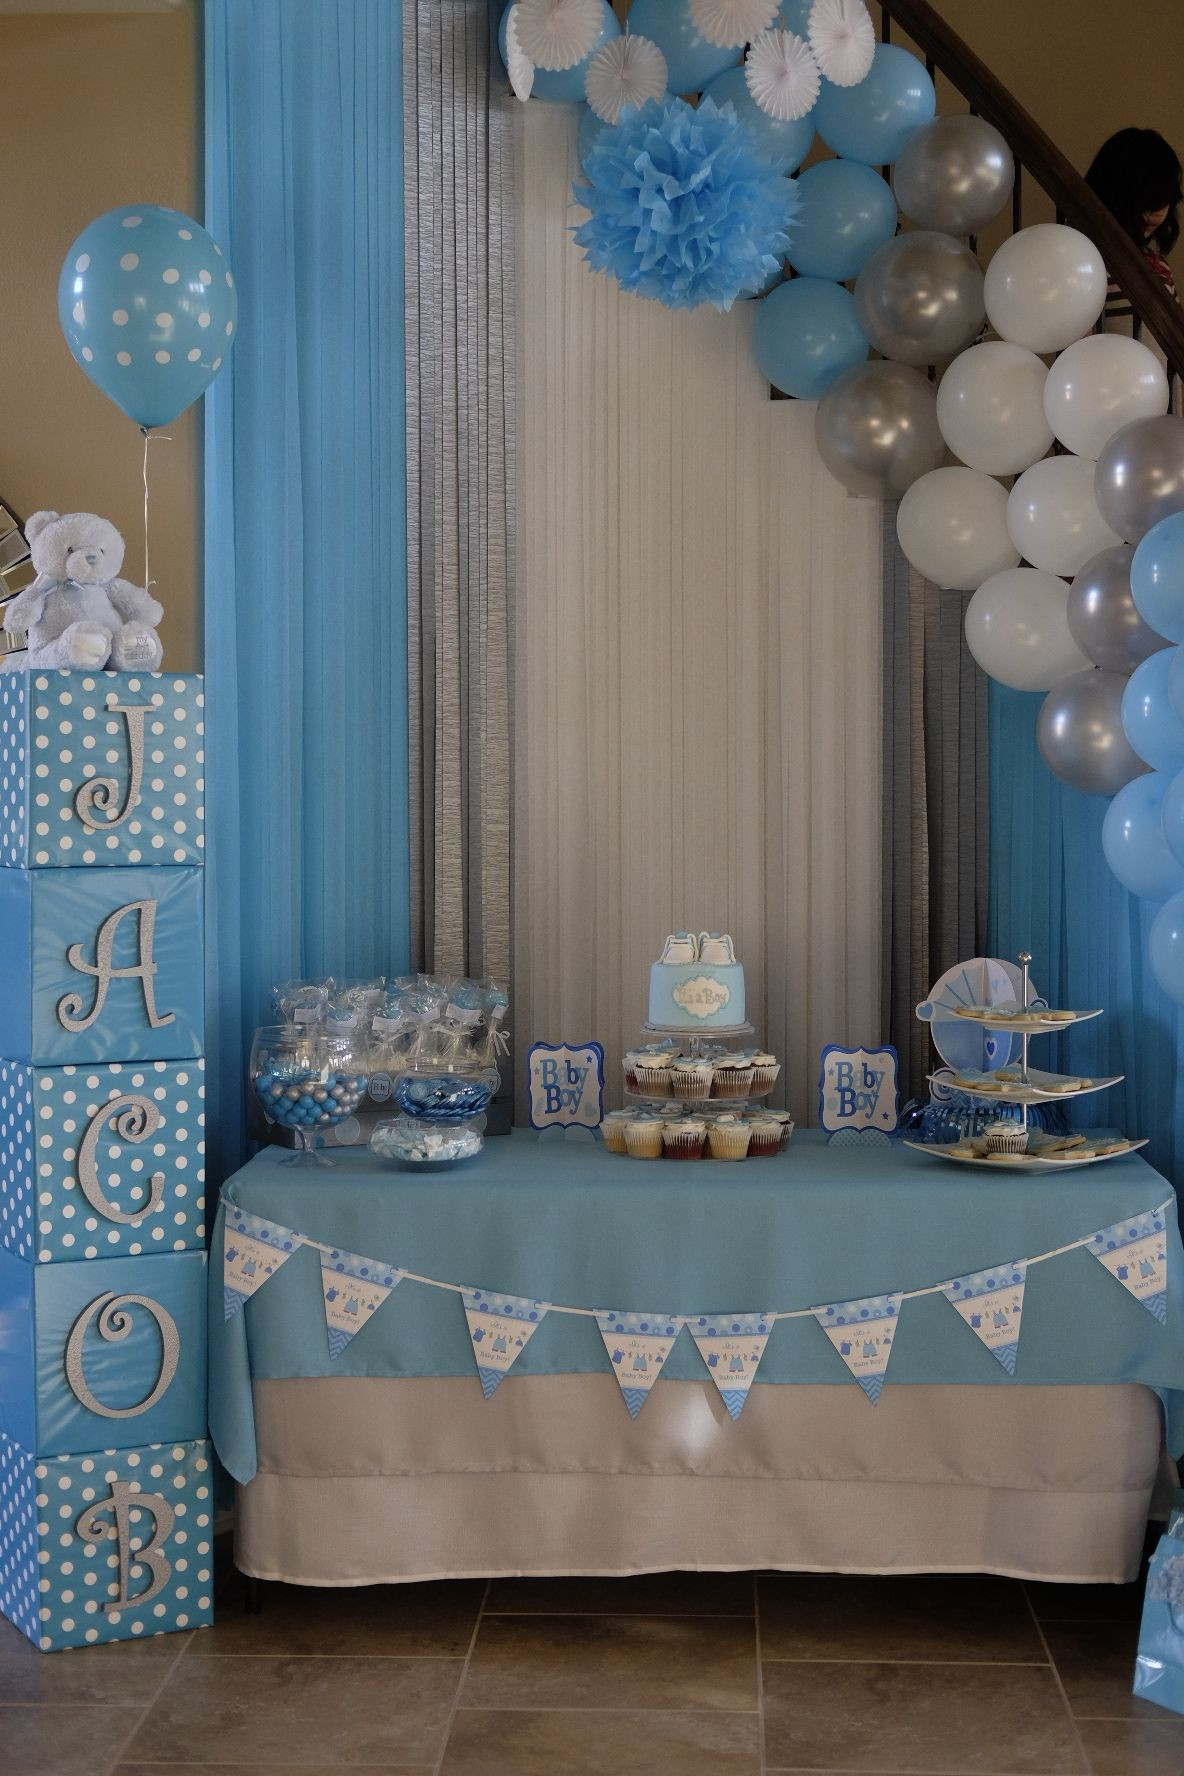 Baby Shower Ideas For Boys Decorations
 Pin by Jennelyn Escoto on BABY JACOB SHOWER in 2019